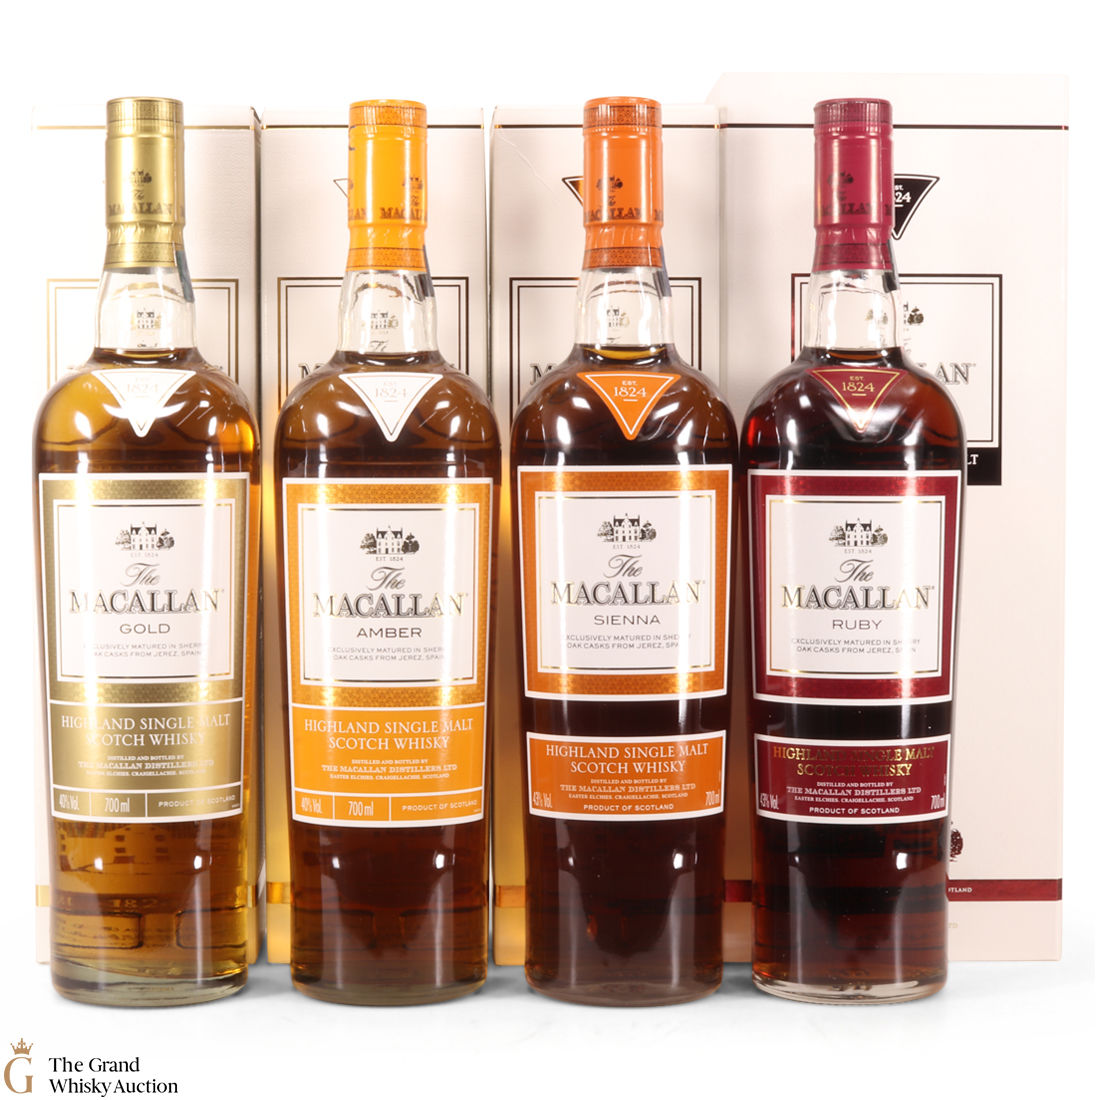 Macallan 1824 Series Gold Amber Sienna Ruby Auction The Grand Whisky Auction